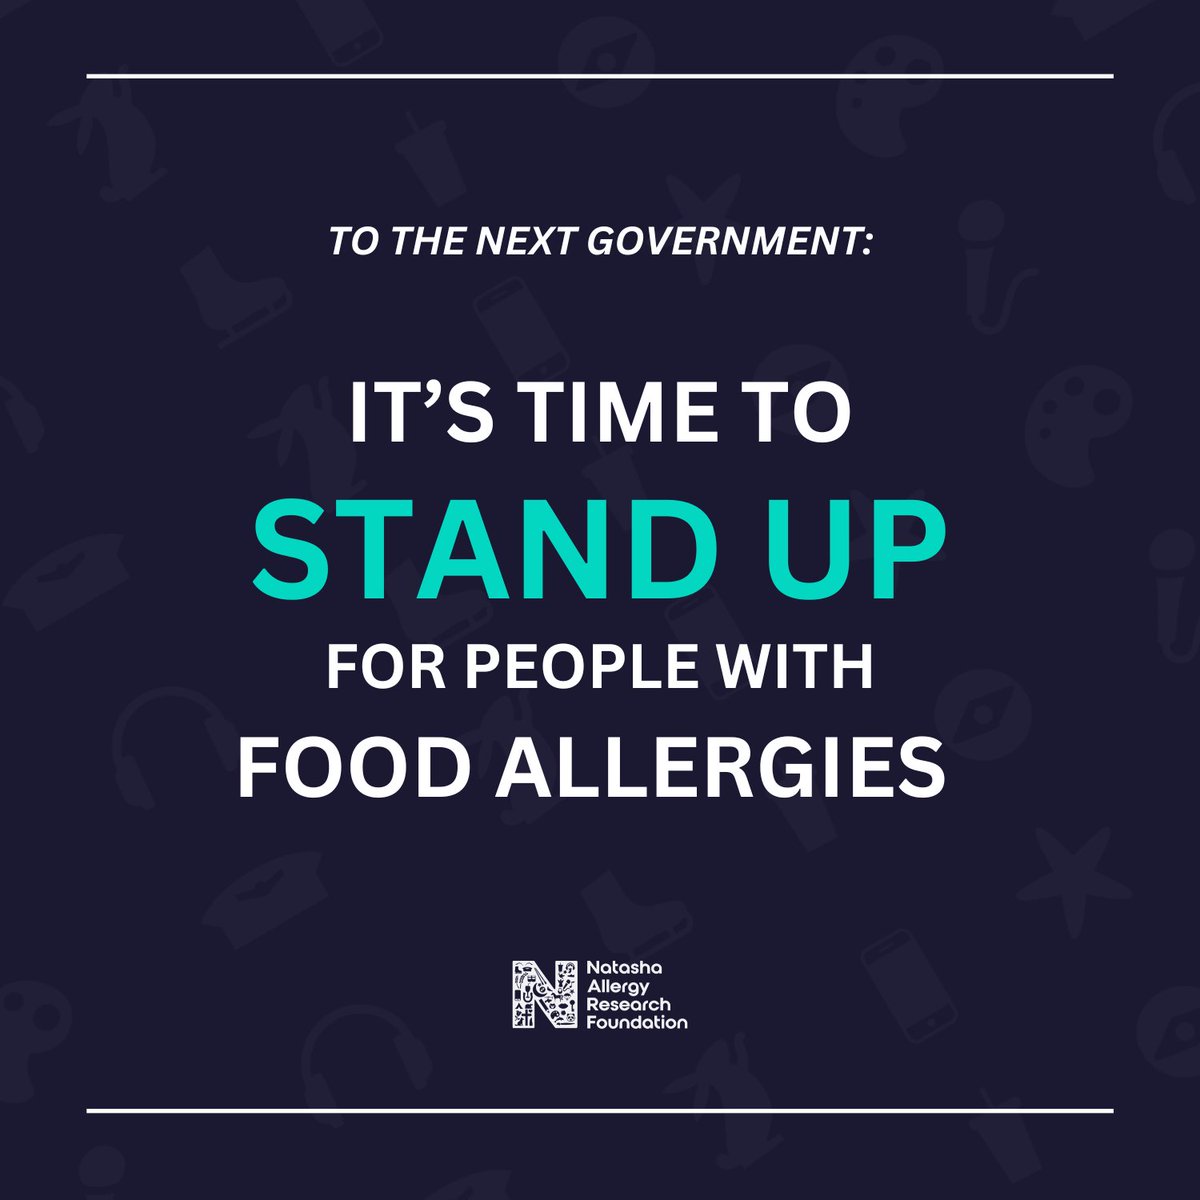 The #generalelection is our chance to unite. #NHS services are inadequate, schools and businesses are unprepared, and research is lacking. People with allergies feel ignored. We need an #AllergyTsar to address these issues. Share this with your MP and demand change!